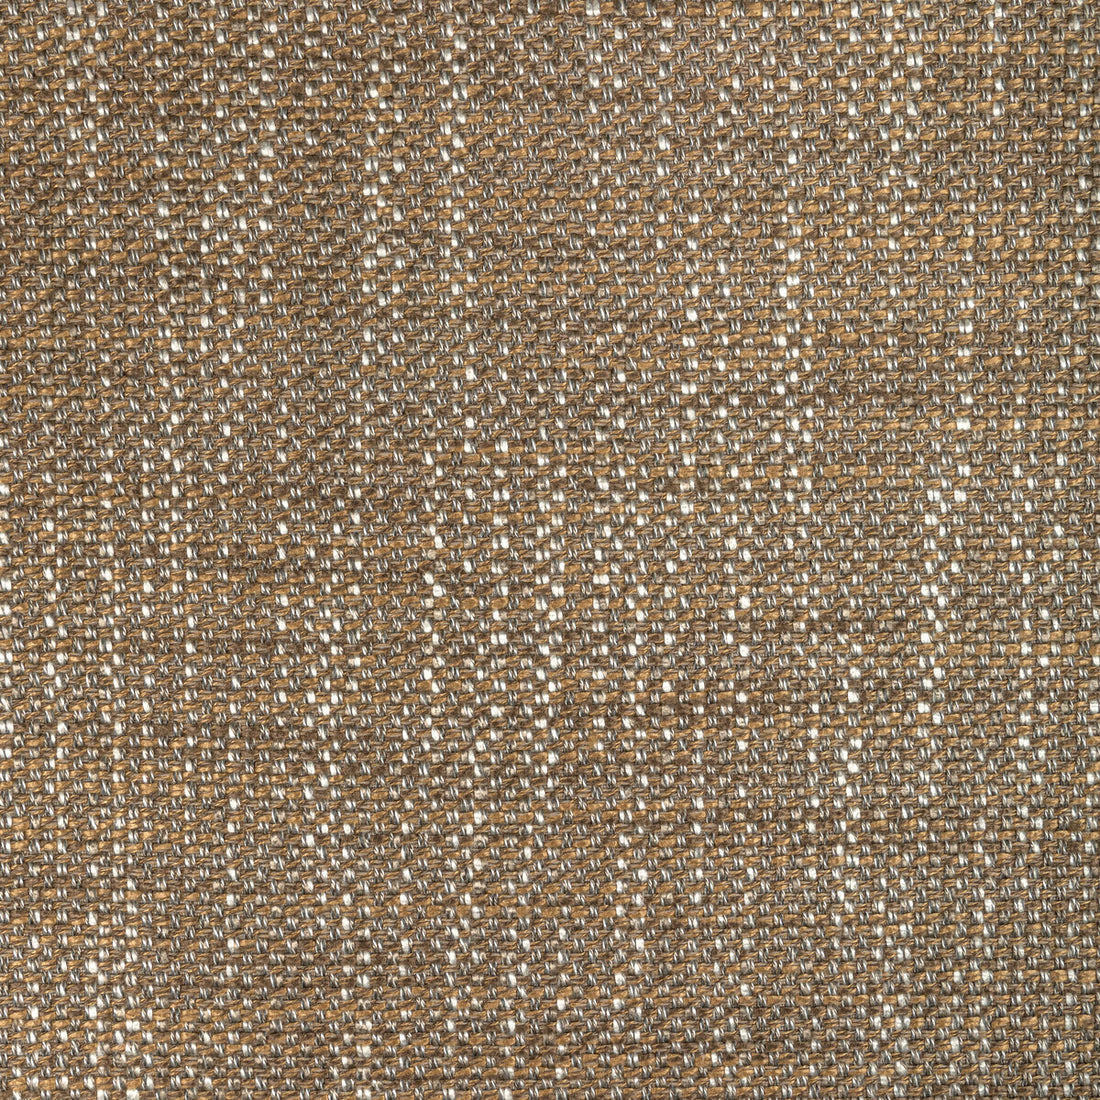 Kravet Design fabric in 36414-416 color - pattern 36414.416.0 - by Kravet Design in the Performance Crypton Home collection